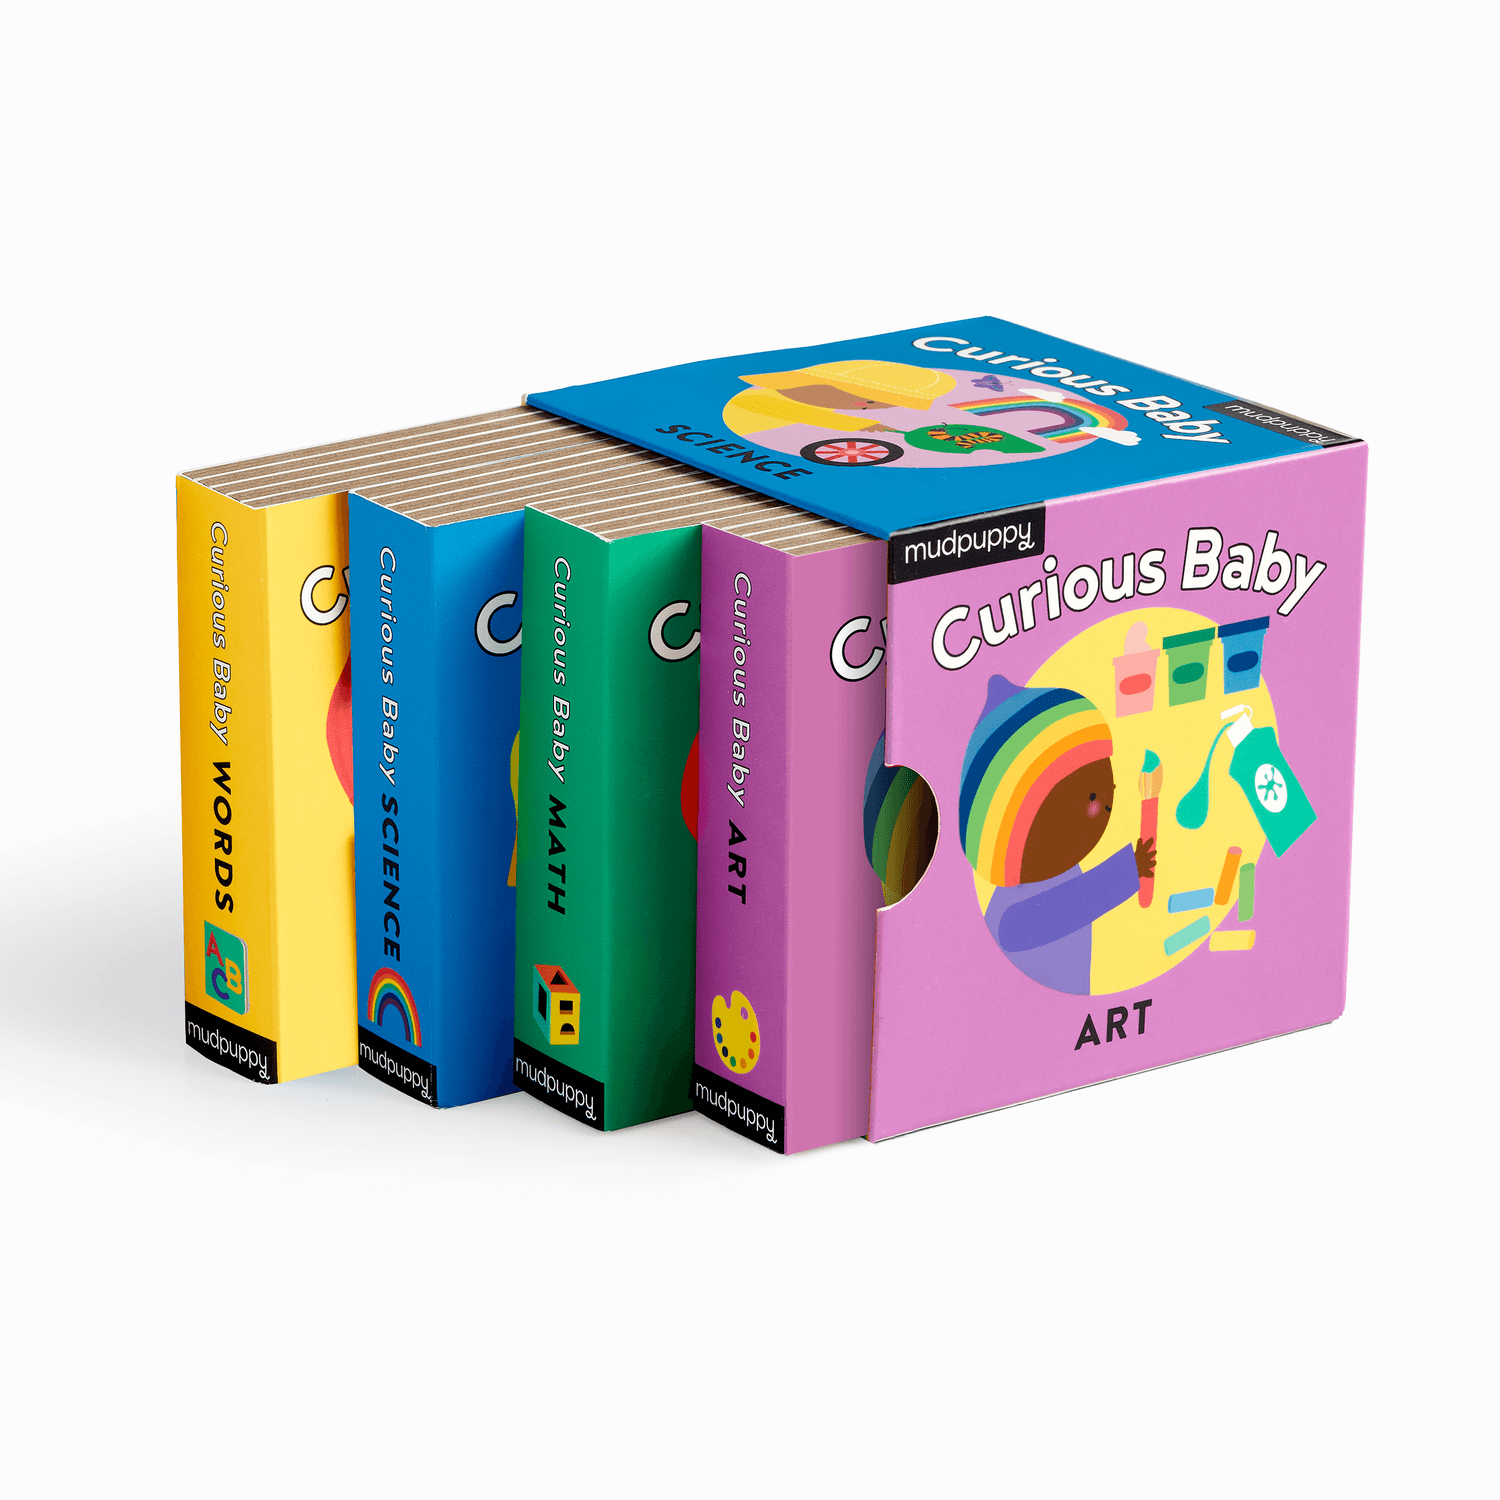 Curious Baby Board Book Set [Book]